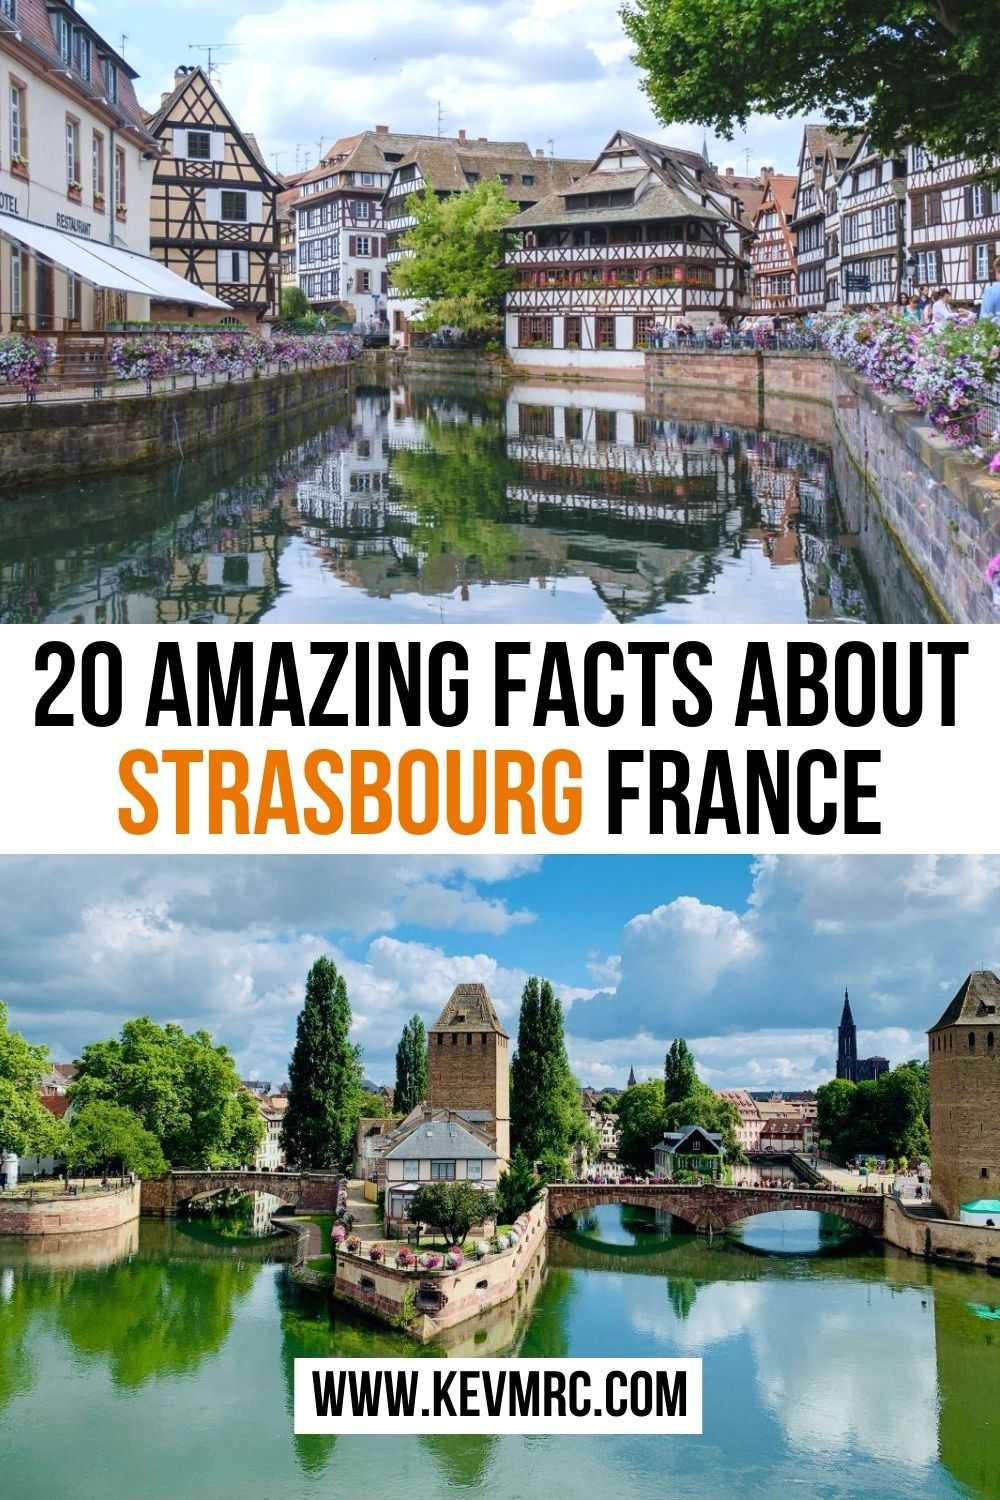 Located in the eastern tip of France, Strasbourg is a beautiful picturesque city most famous for its Christmas market and for its strong German influence. Learn more about this city through these 20 interesting facts about Strasbourg France. strasbourg facts | fun facts about strasbourg